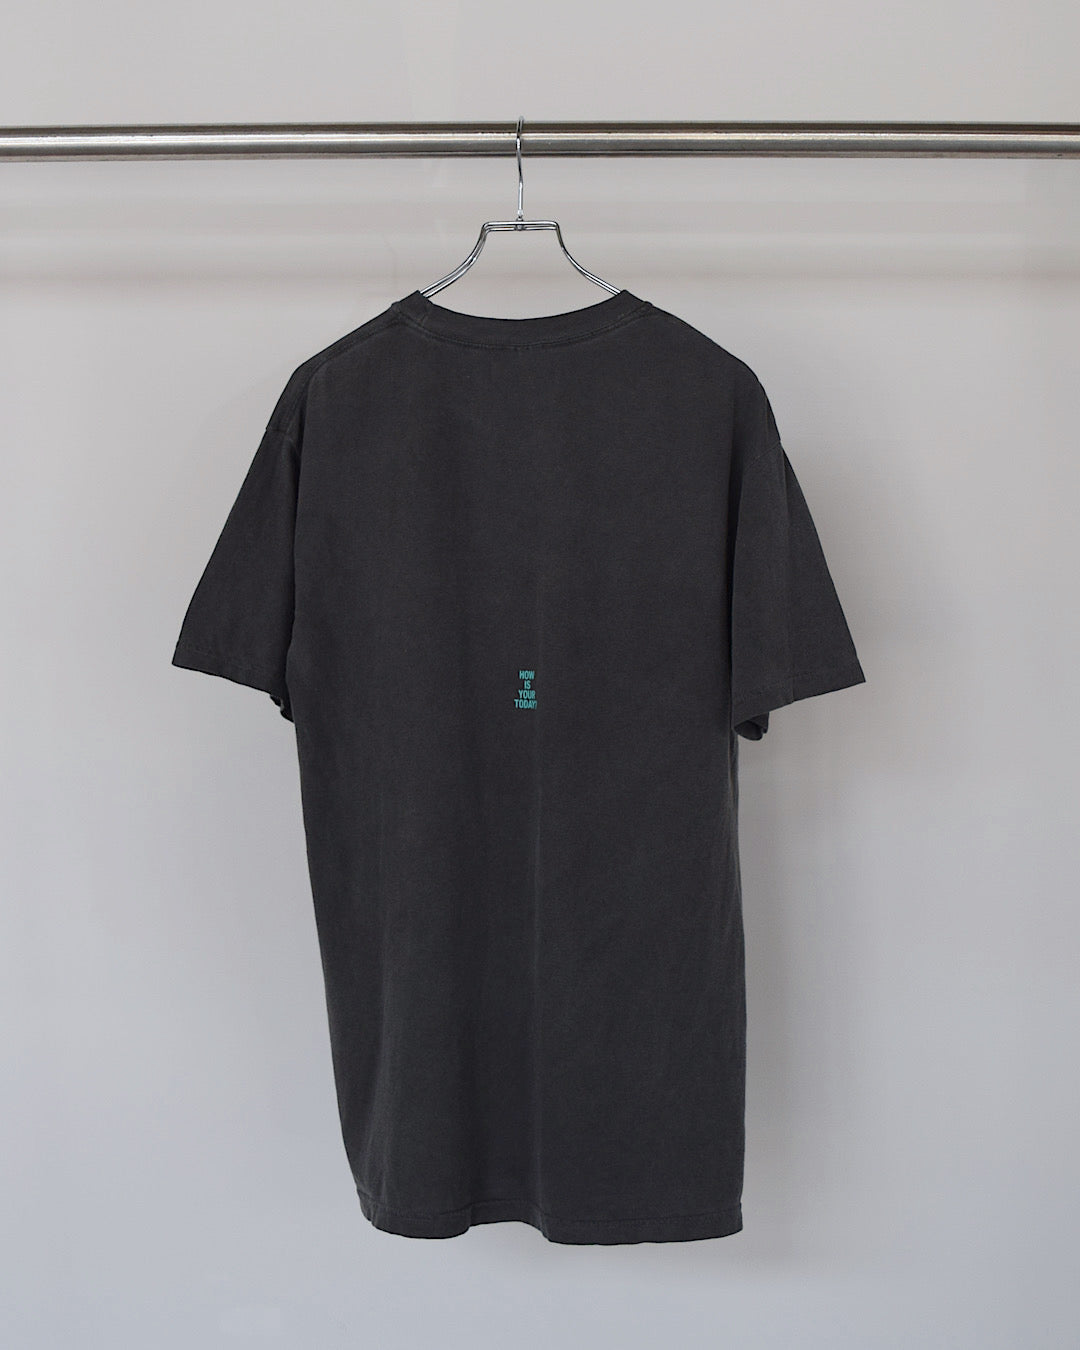 TODAY edition / Band #1 SS Tee - BLACK